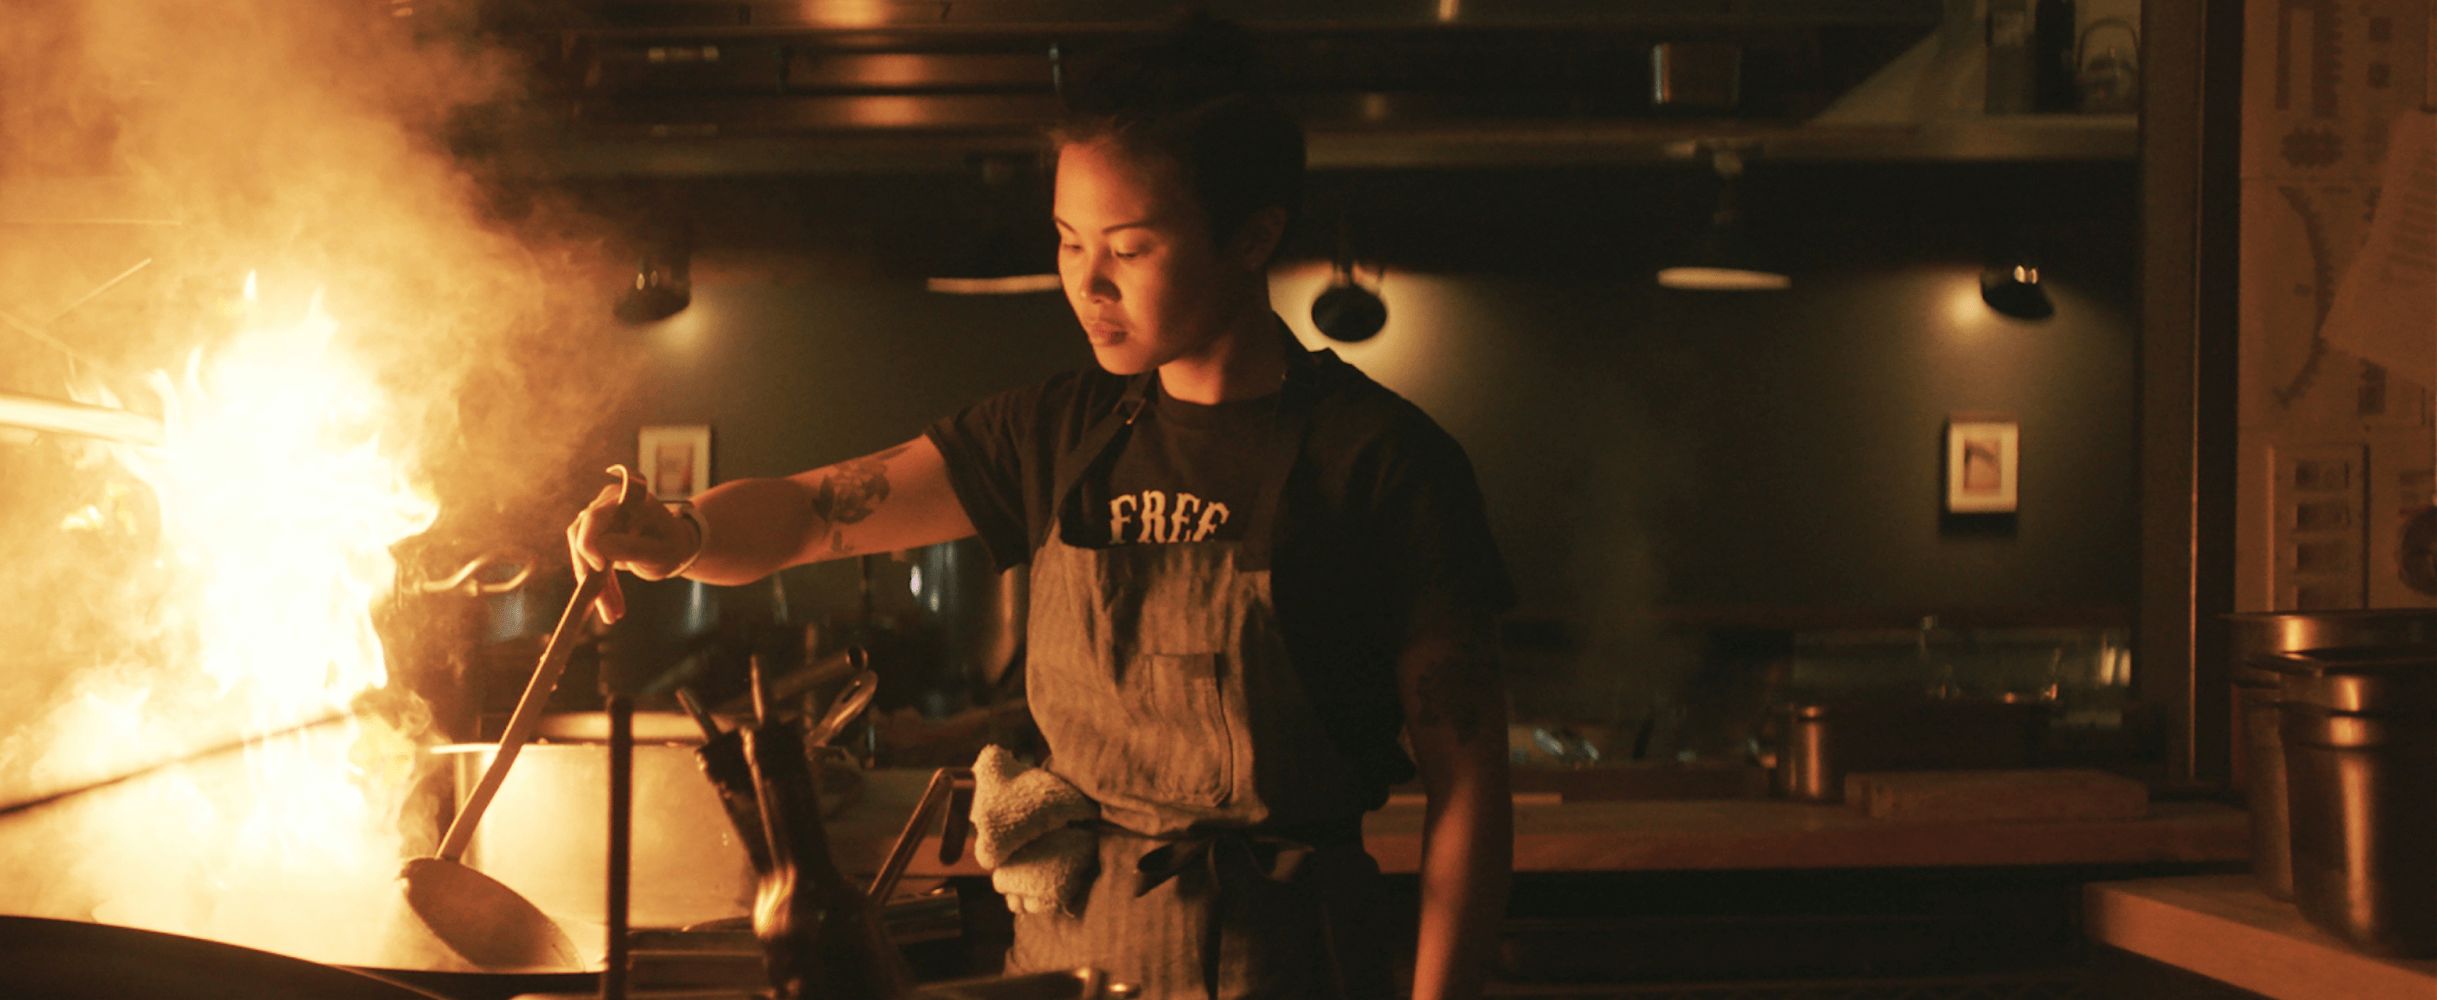 A chef working in a kitchen.